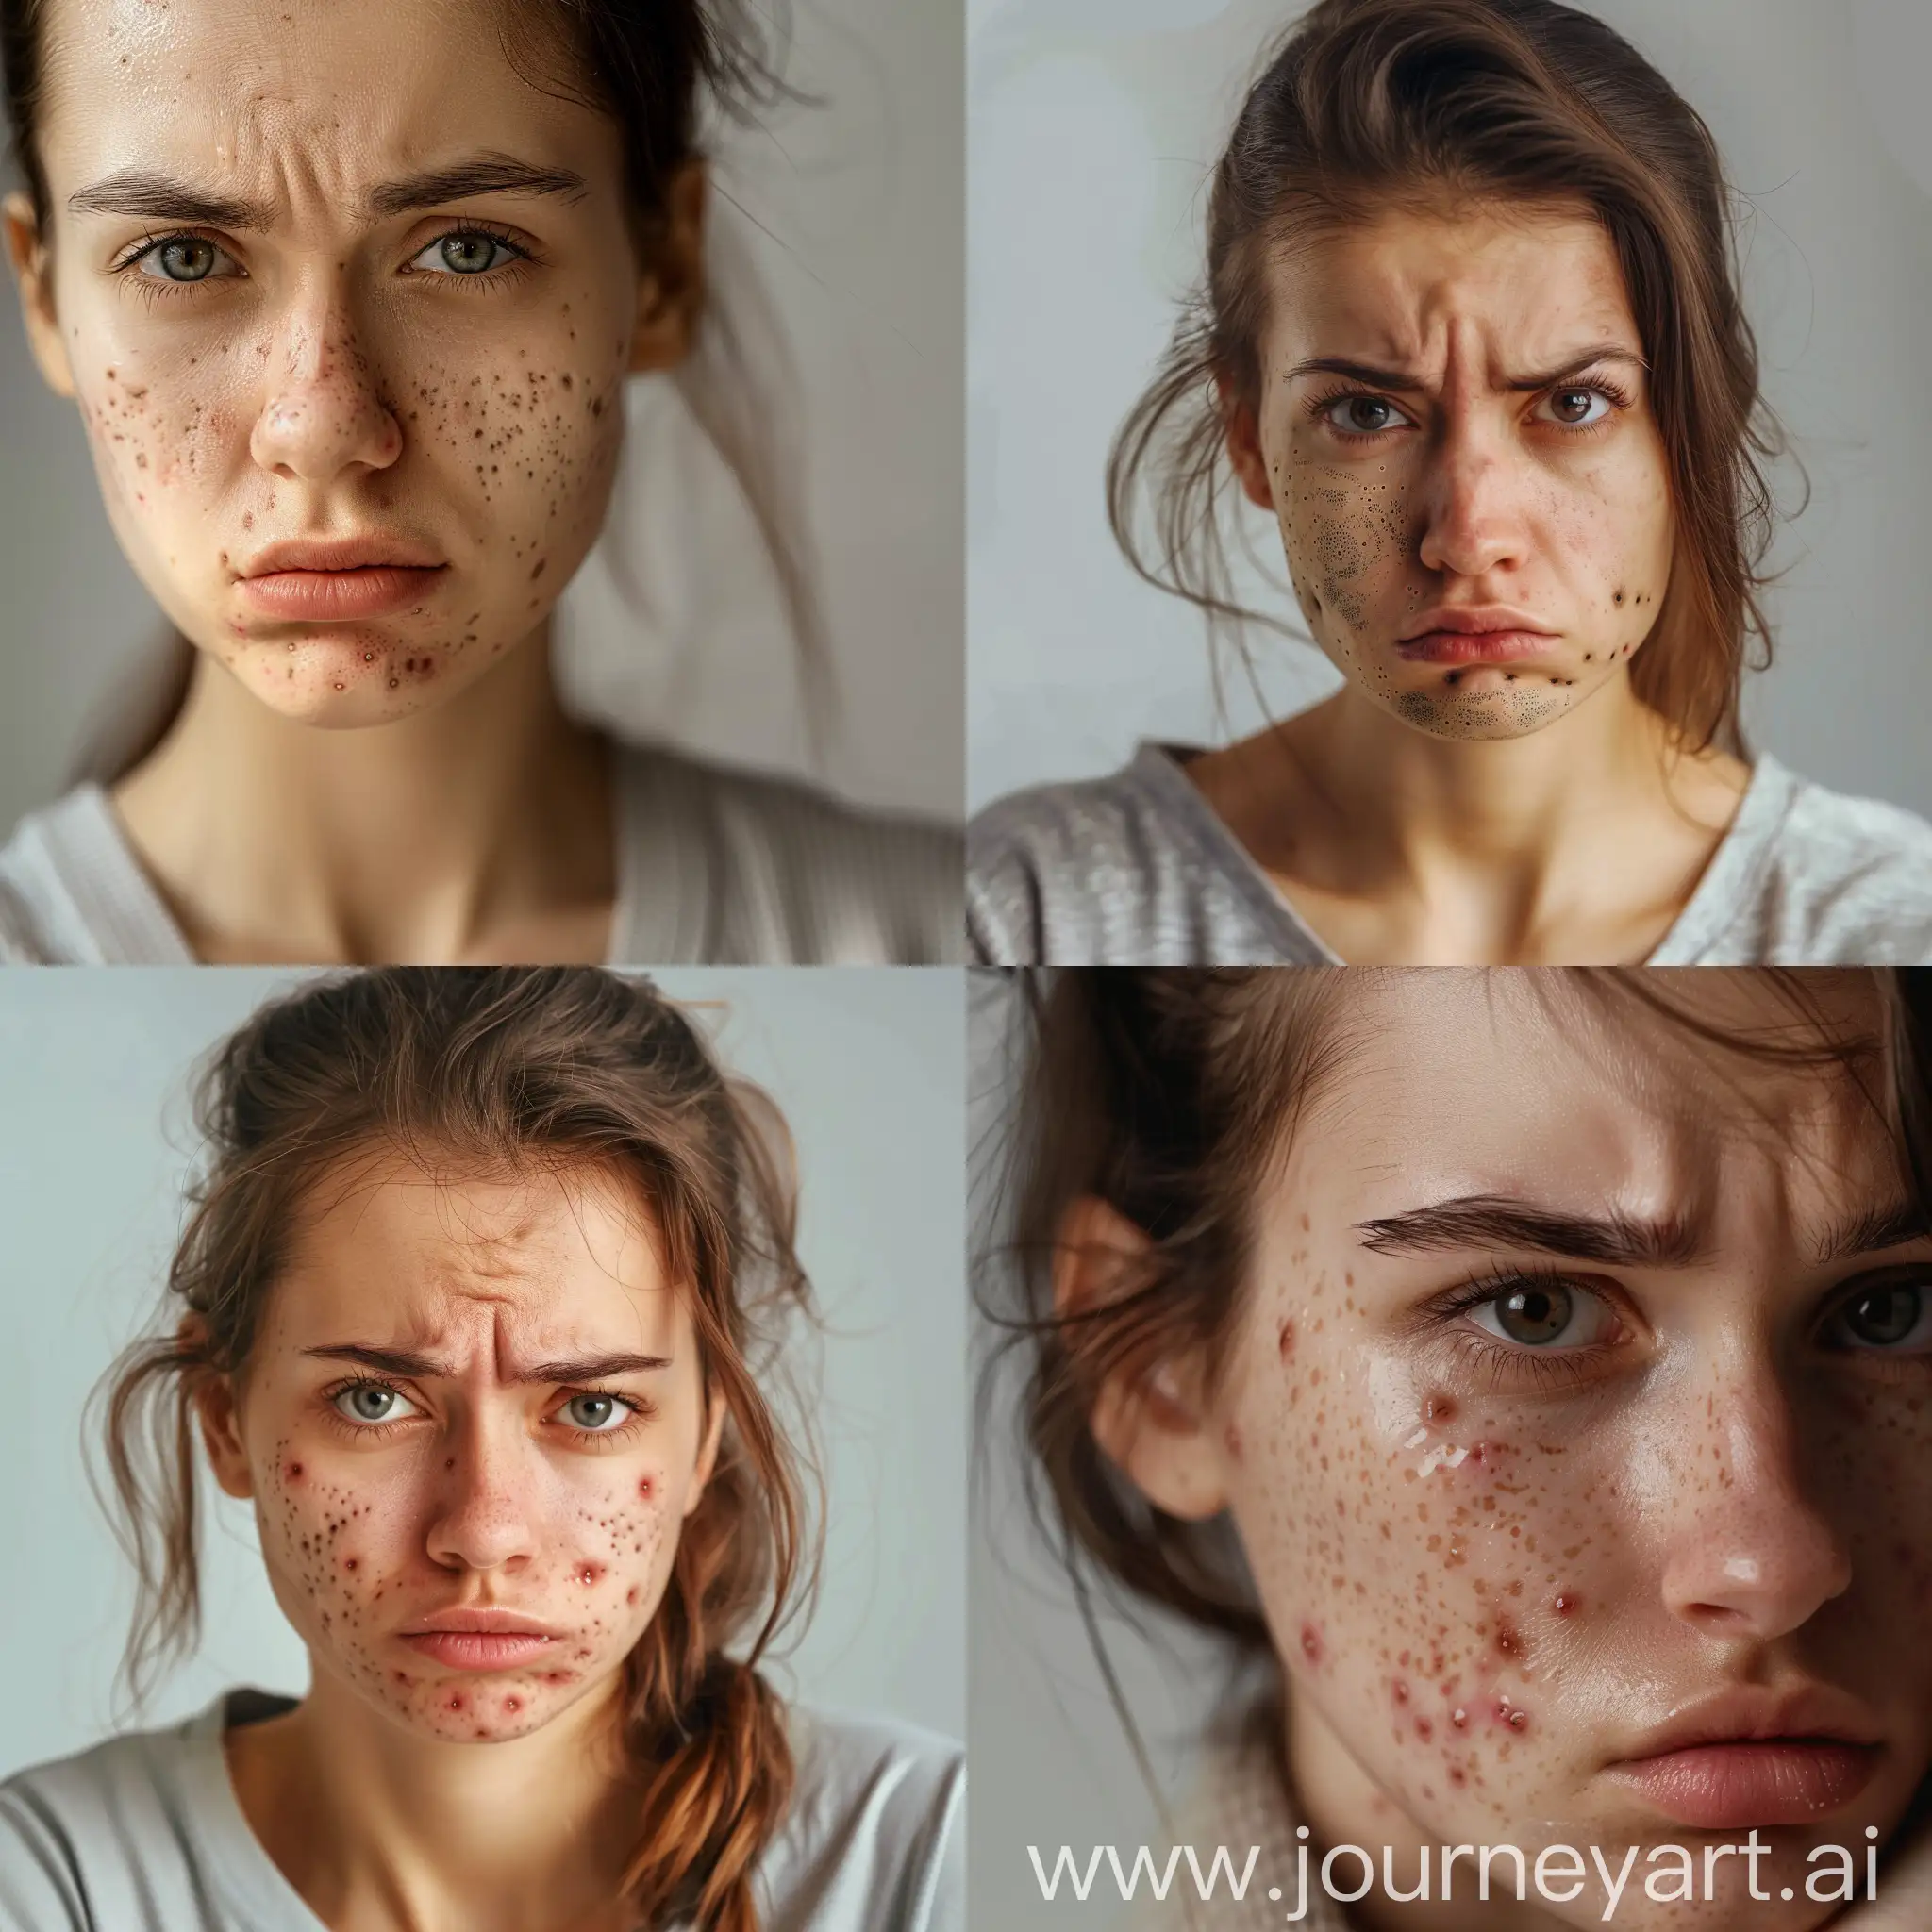 Portrait-of-a-Distressed-Woman-with-Oily-Skin-and-Acne